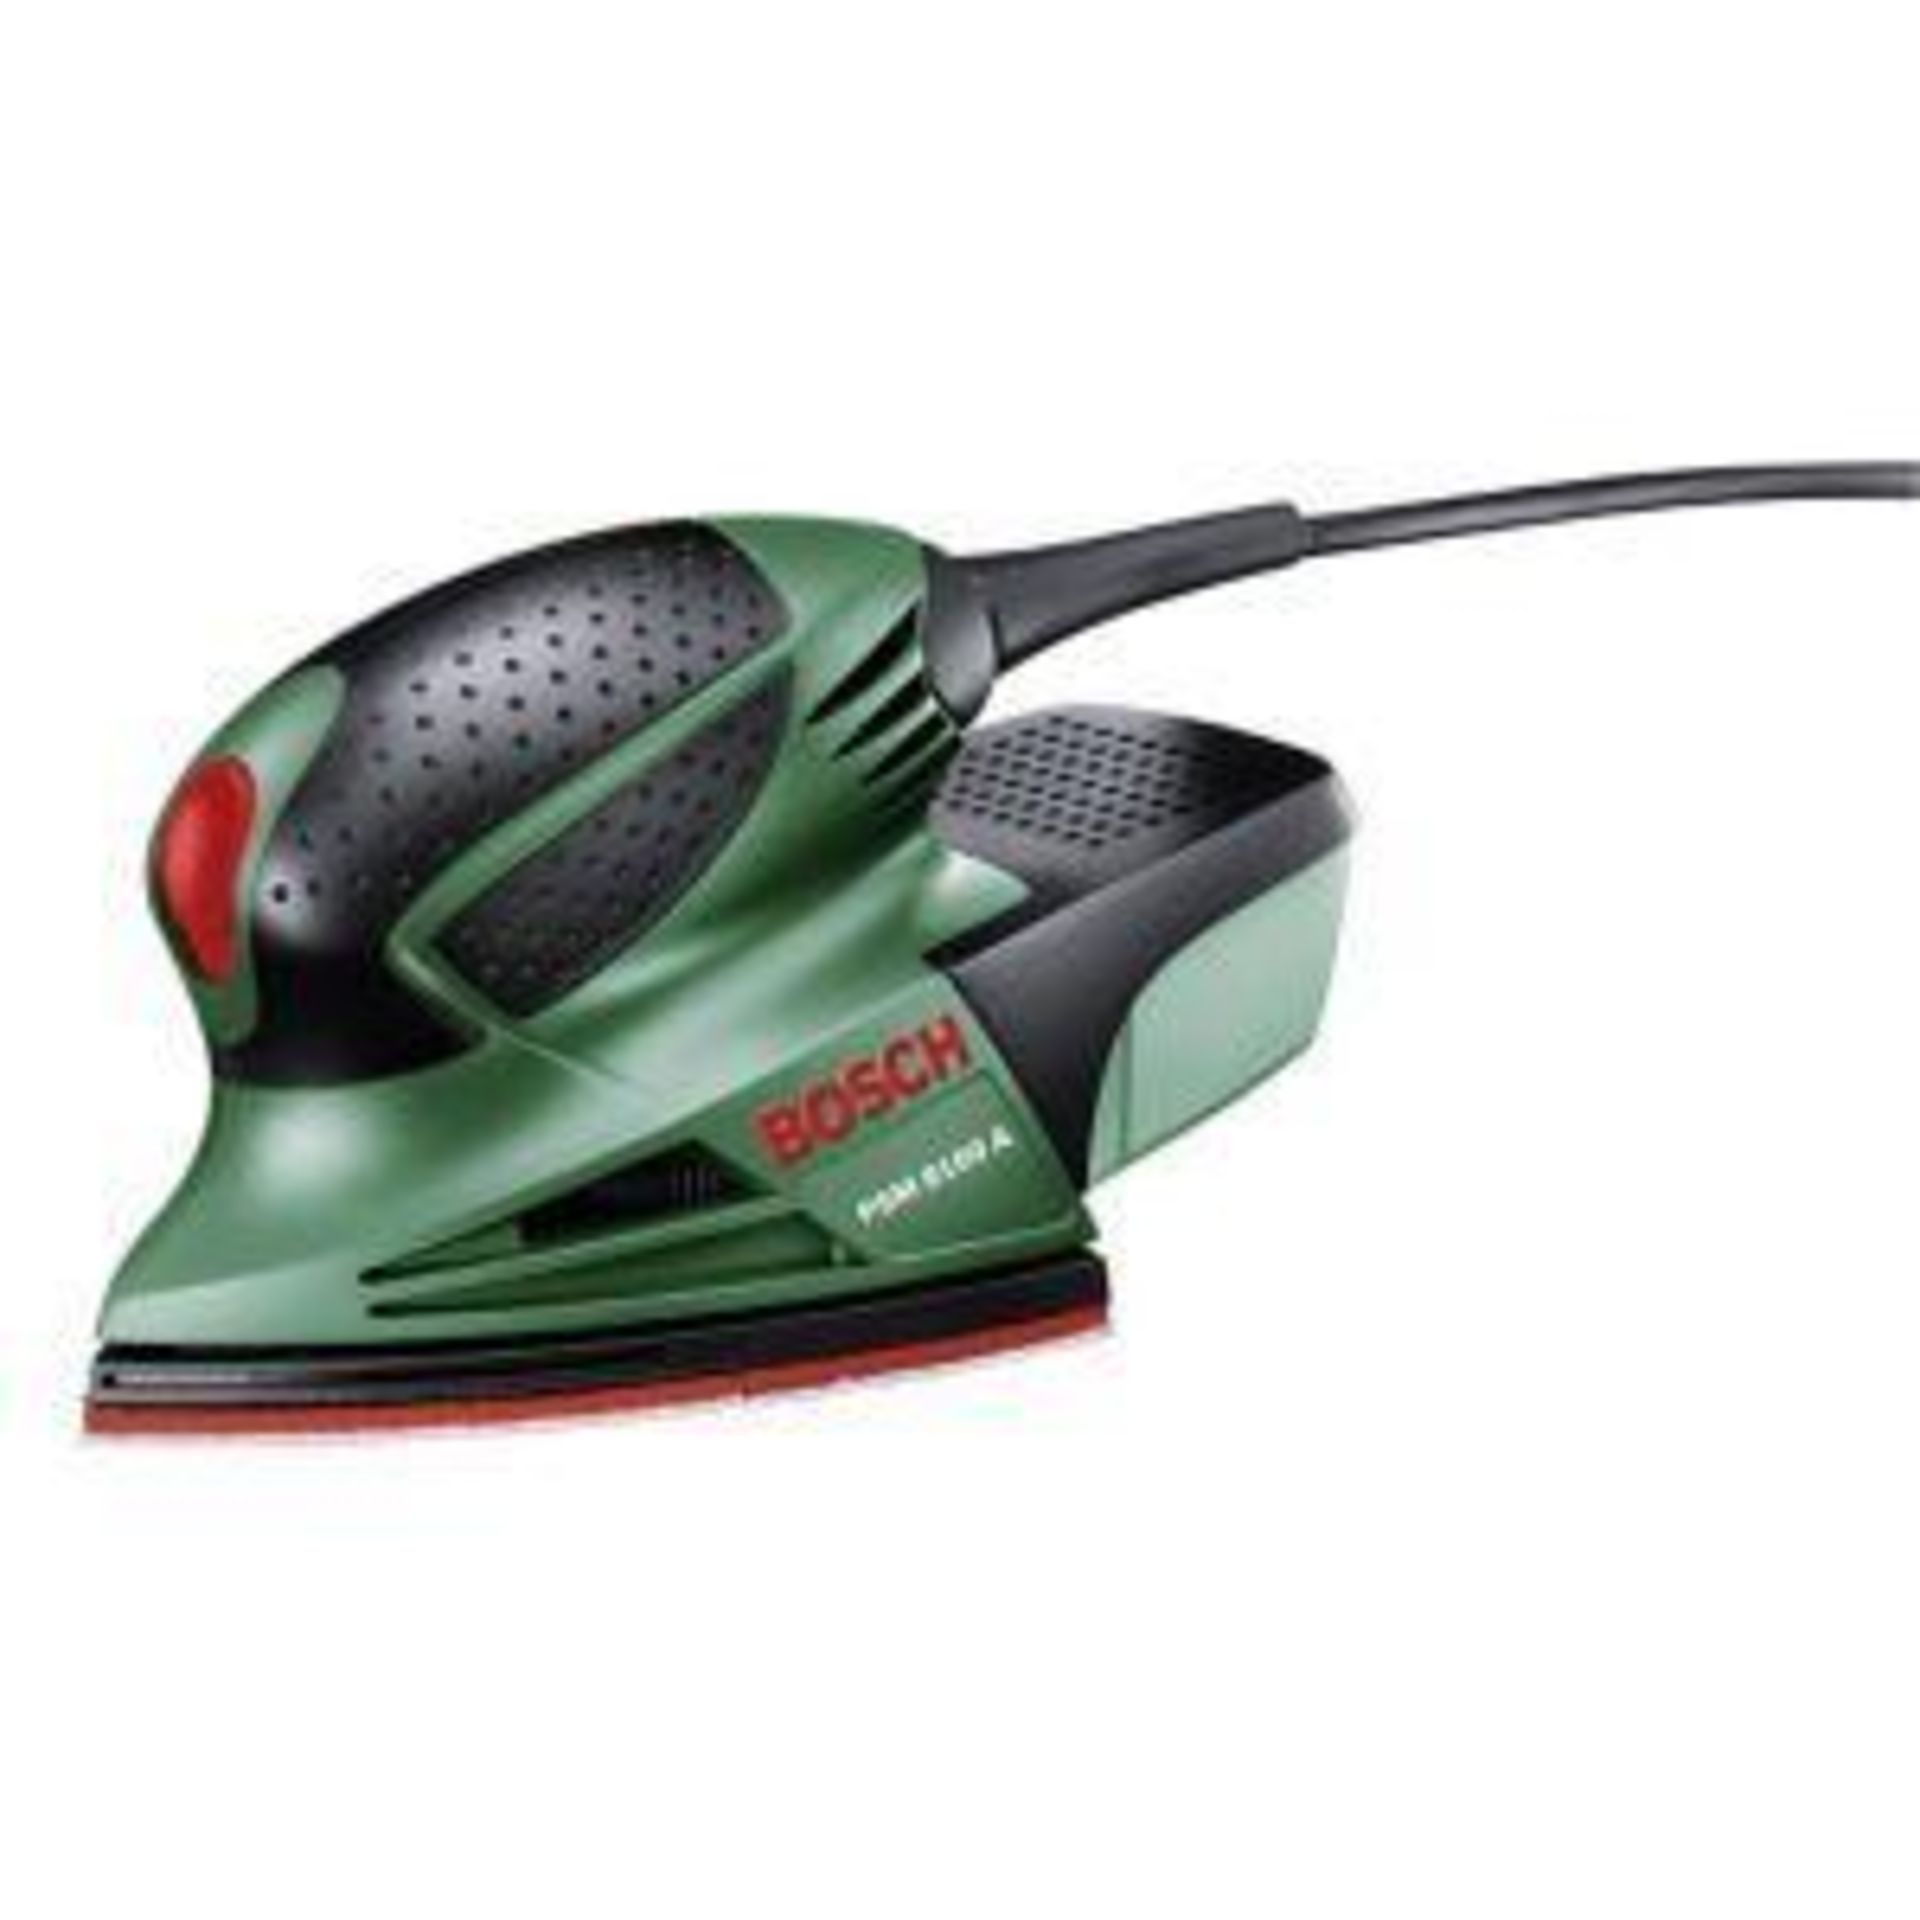 Bosch 80W 240V Corded Detail sander PSM 8100A (LOCATION - H/S R 5.4) Compact, ergonomic &